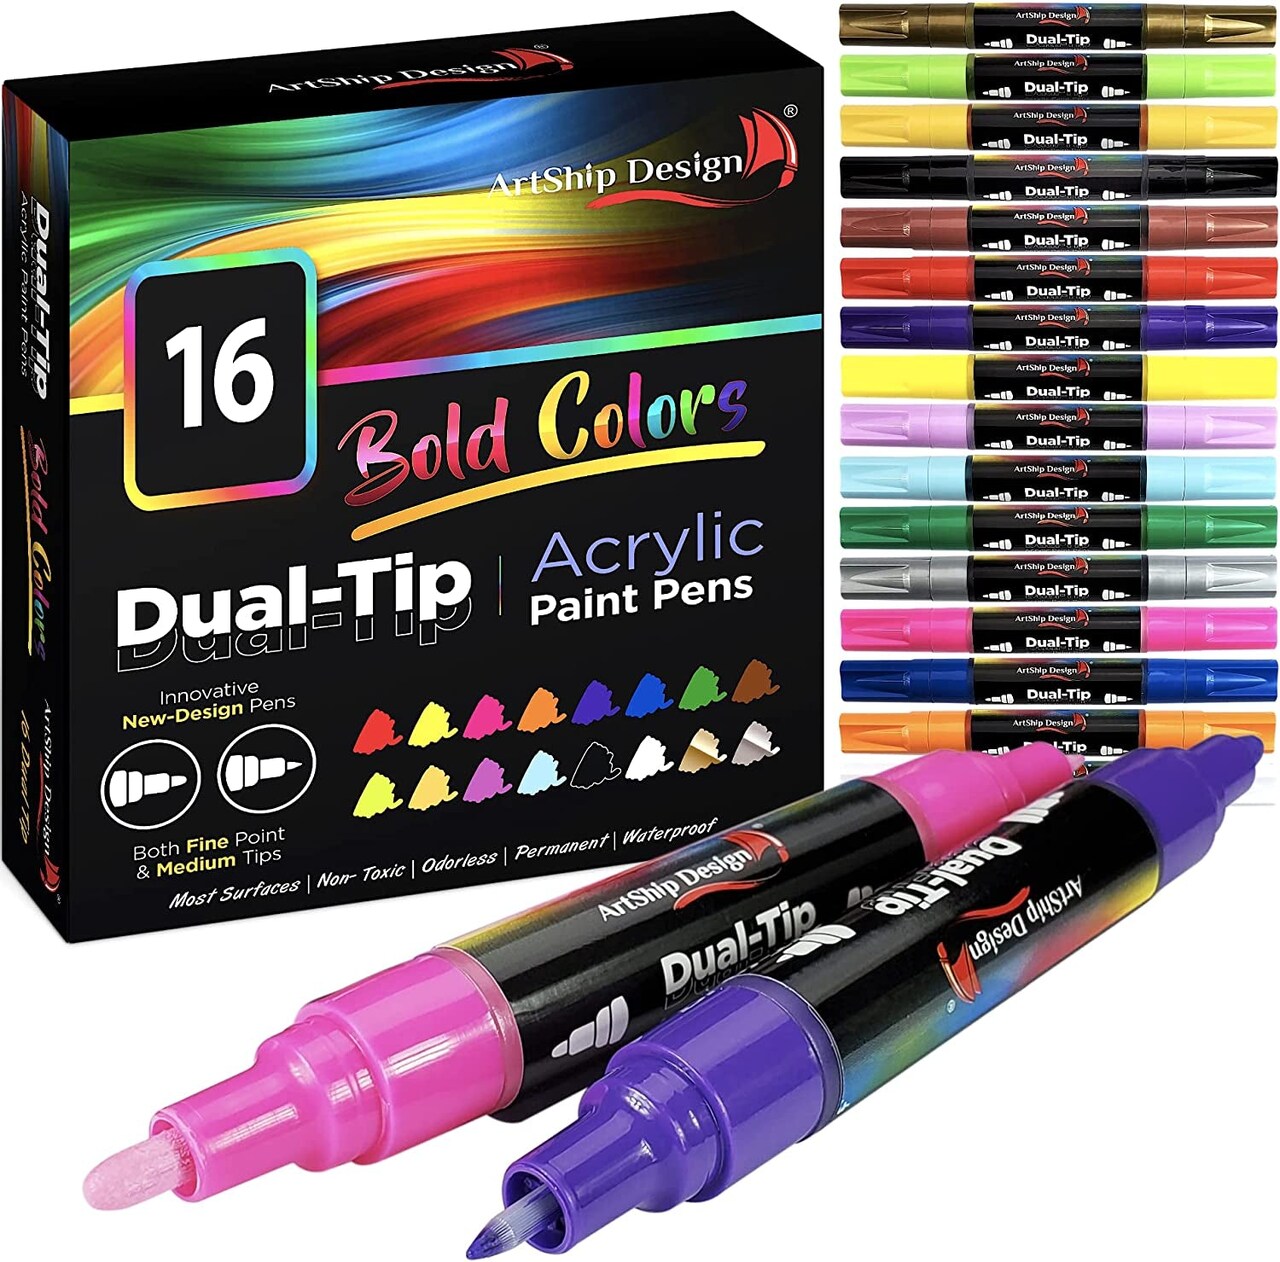 Neon UV Fluorescent Acrylic Paint Pens, Double Pack of Both Extra Fine and  Medium Tip Paint Markers, for Rock Painting, Mug, Ceramic, Glass, and More,  Water Based Non-Toxic and No Odor